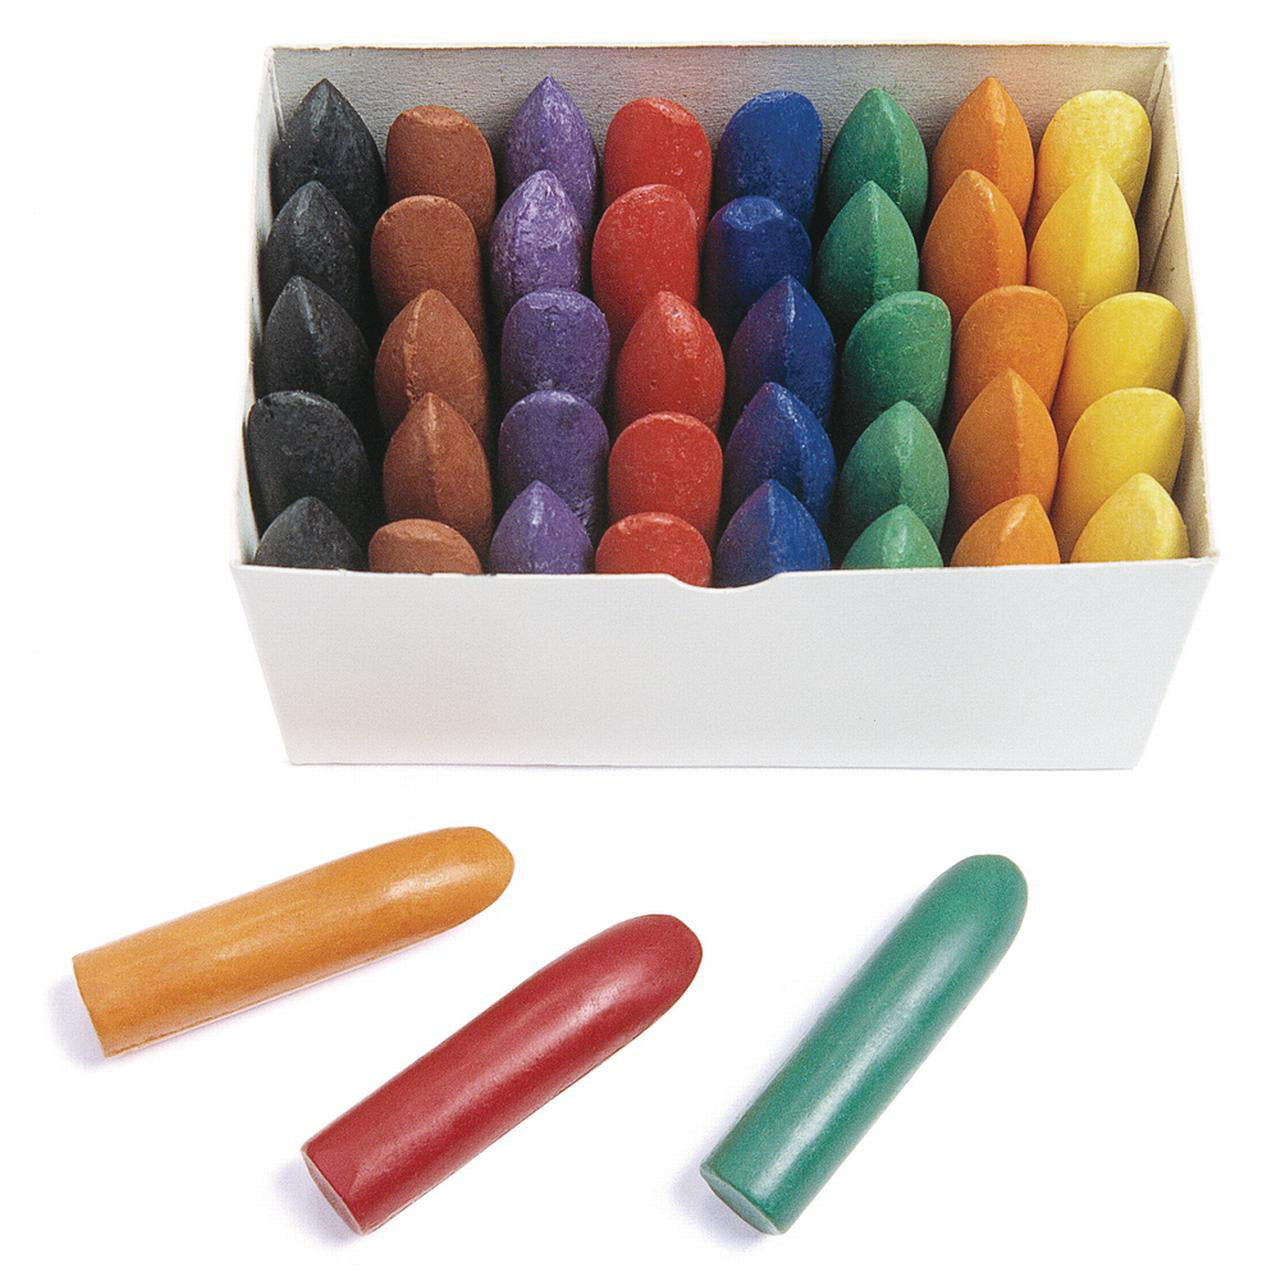 Basic Supplies CHUBBY CRAYONS 40 Pieces 